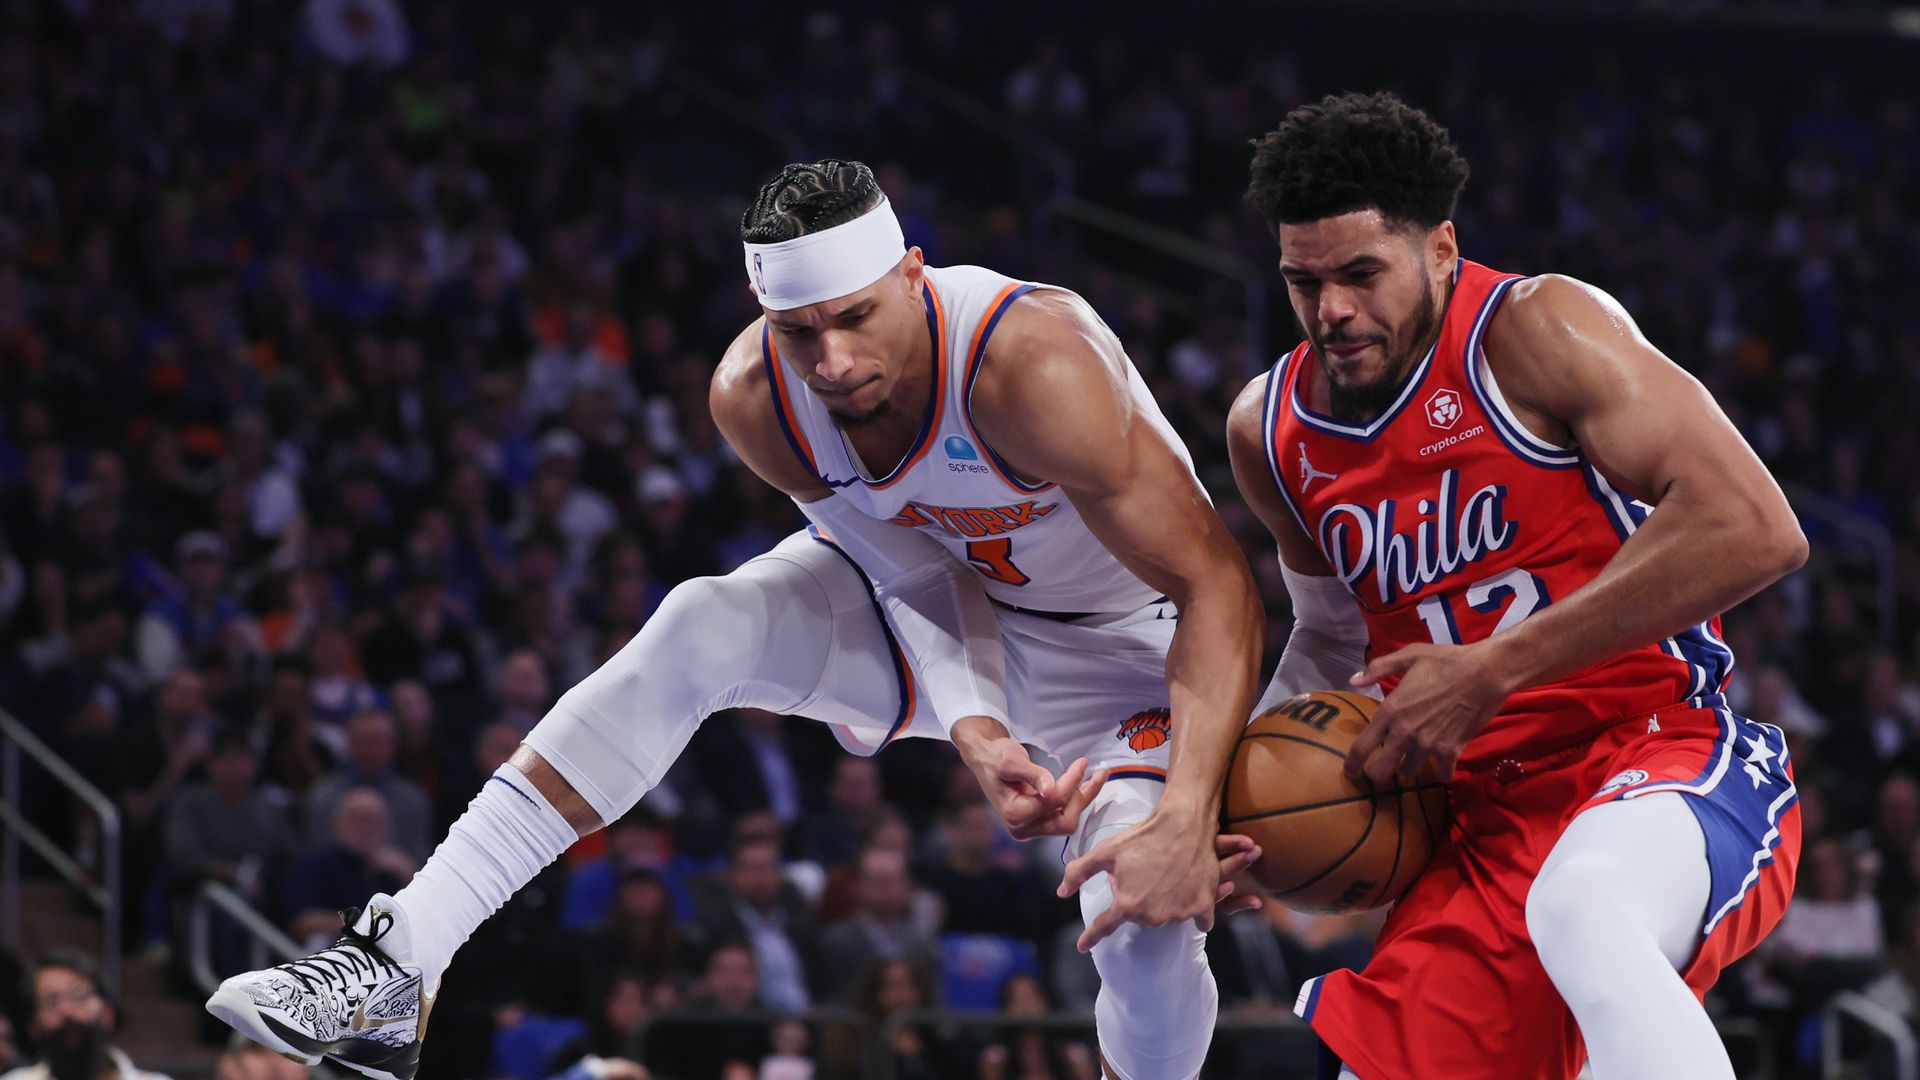 the contrast between tobias harris and josh hart was series-altering for the sixers